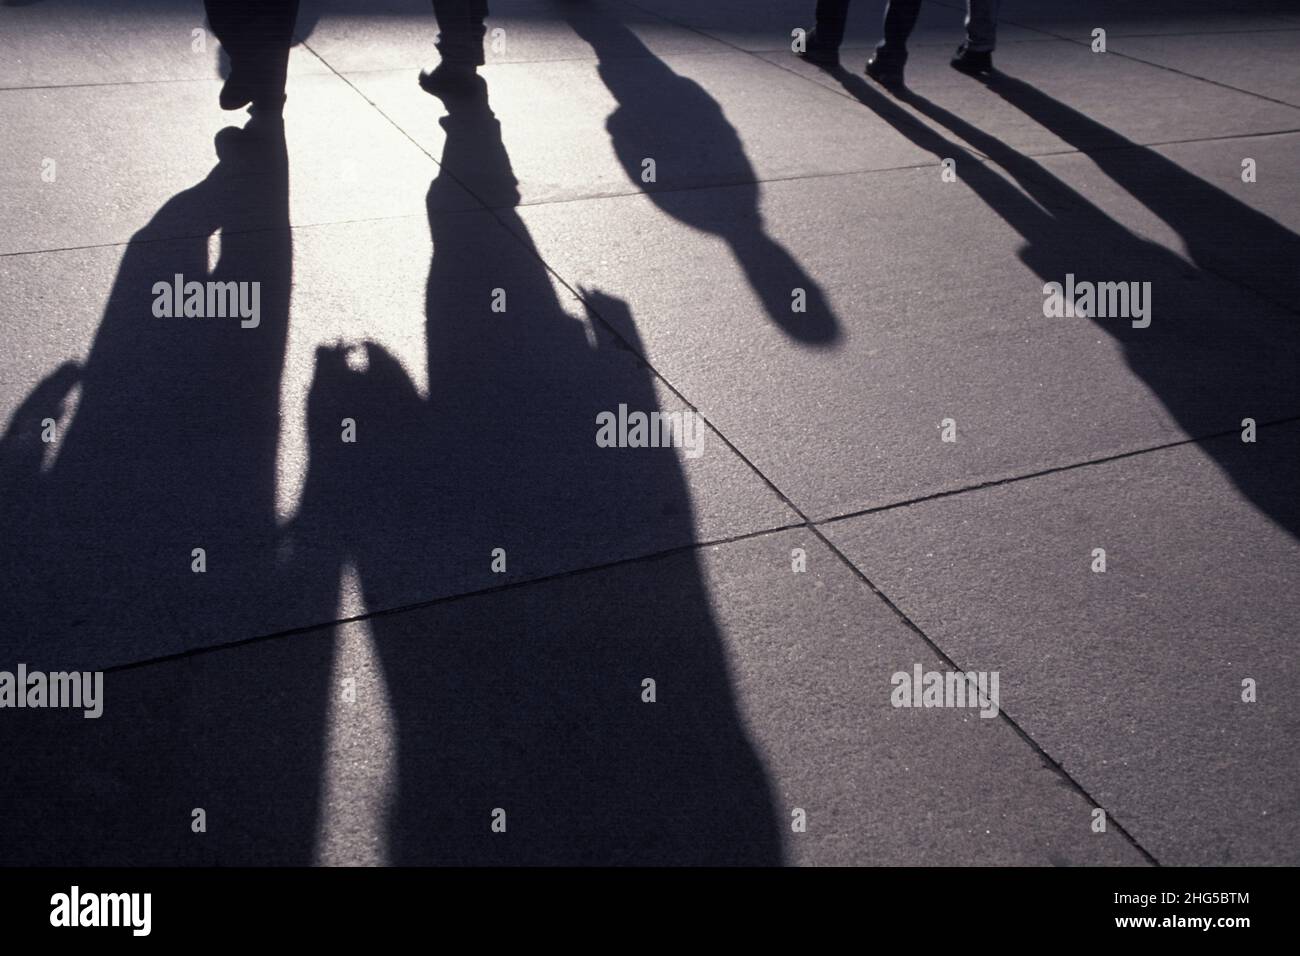 Shadows on pavement of people walking. Group of unrecognizable commuters in rush hour Midtown Manhattan New York City. Elongated shadows Stock Photo